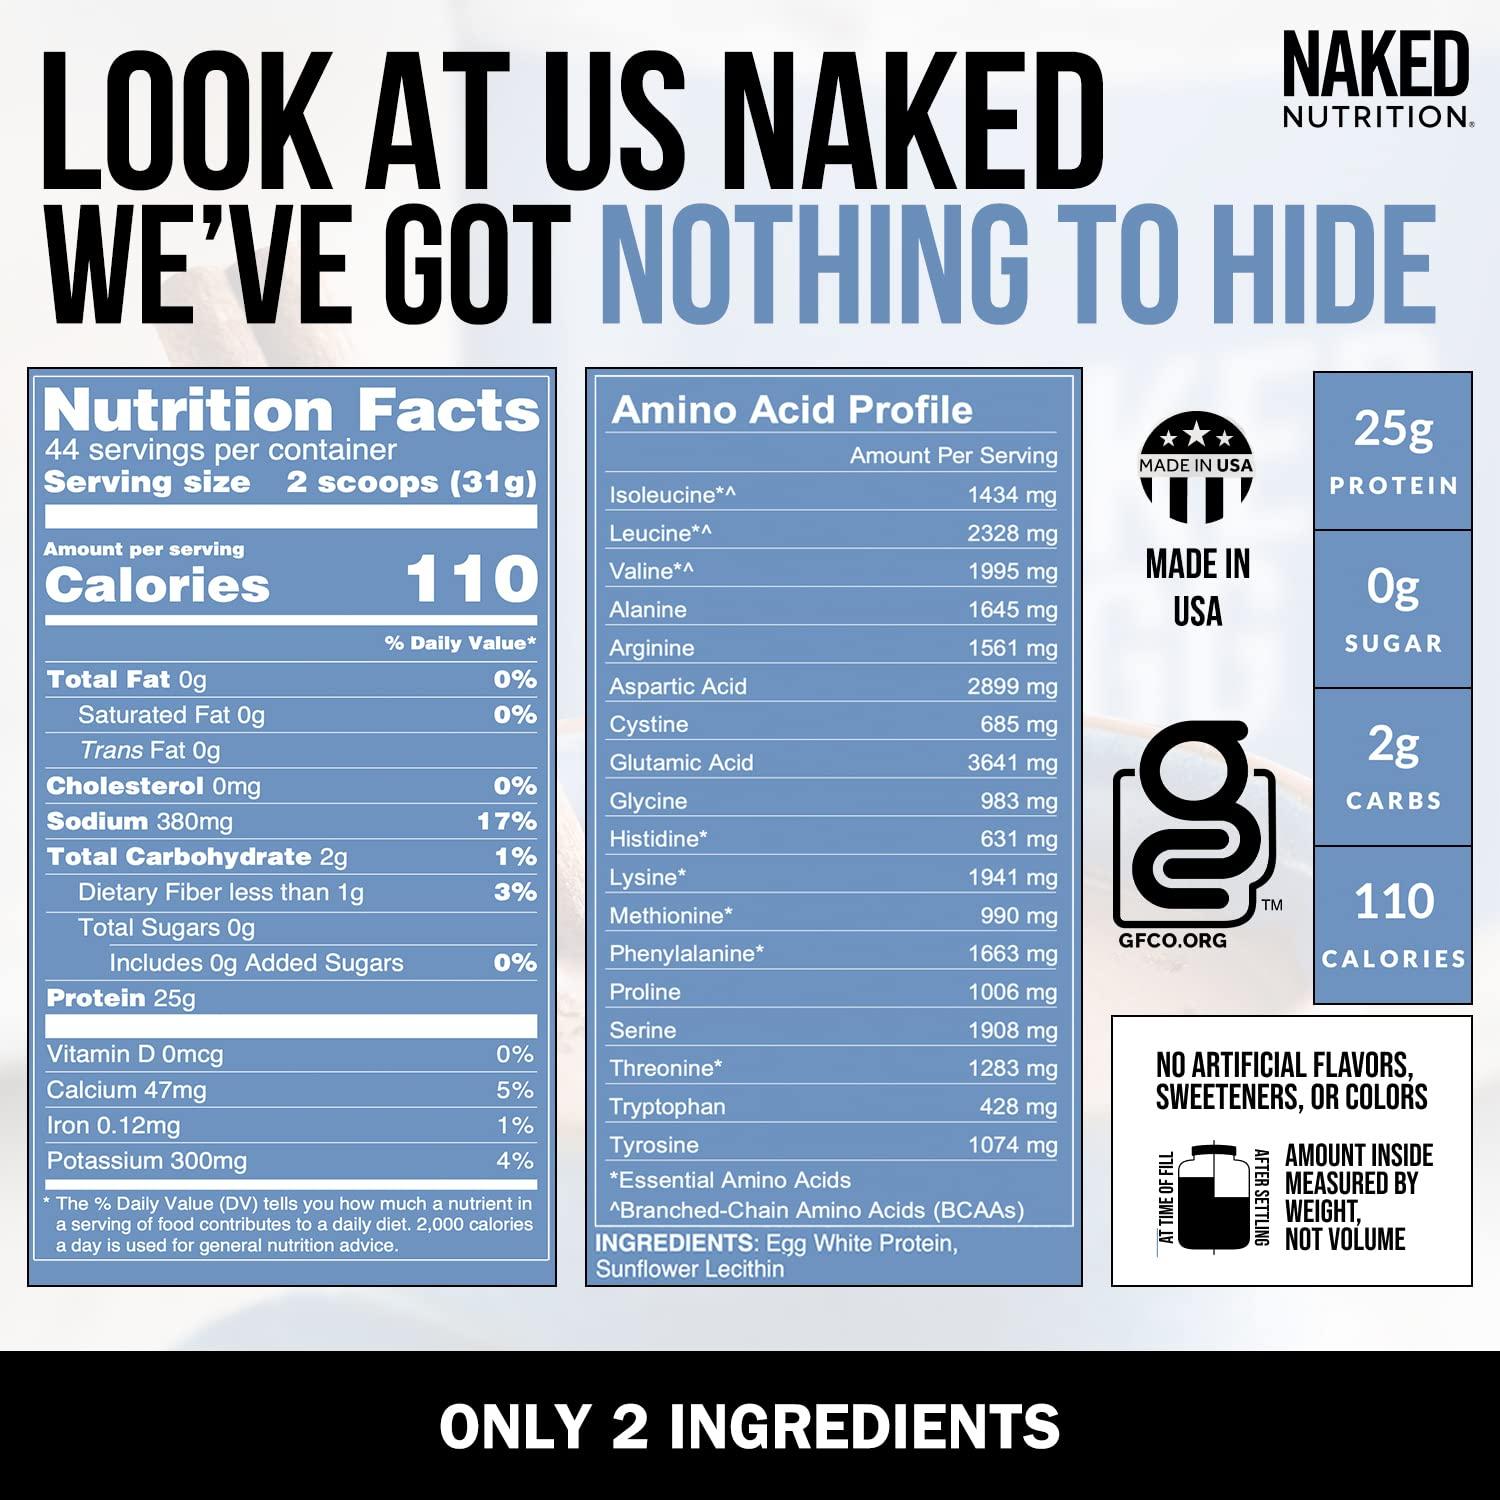 NAKED nutrition 3LB Non-GMO Egg White Protein Supplement Powder, Unflavored, No Additives, Paleo, Dairy Free, Gluten Free, Soy Free - 25g Protein, 44 Servings, 3 pounds